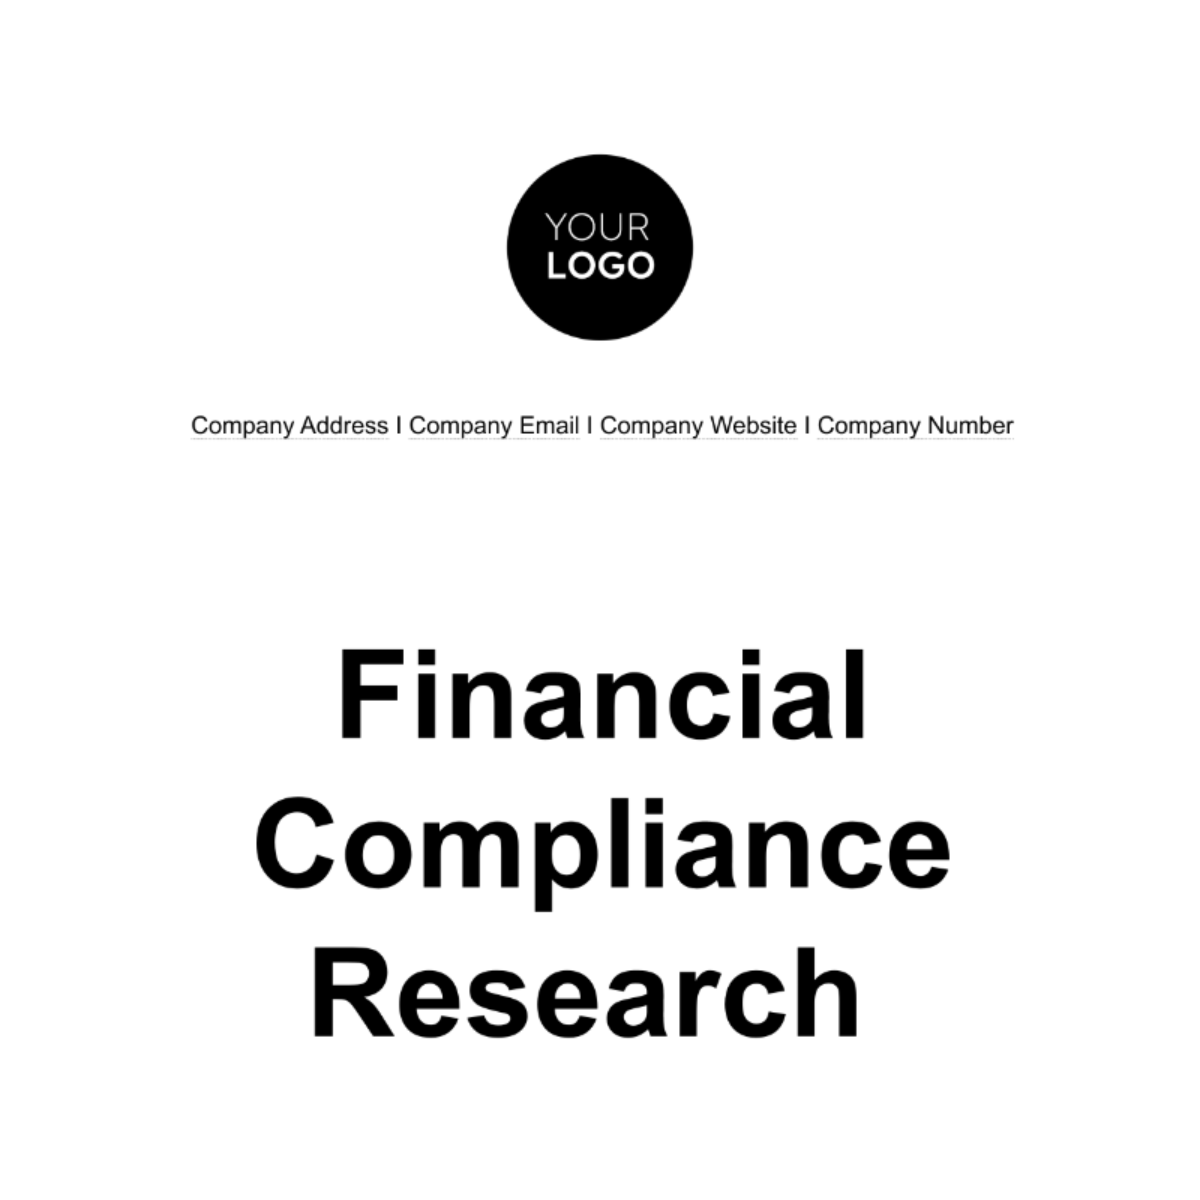 Financial Compliance Research Template